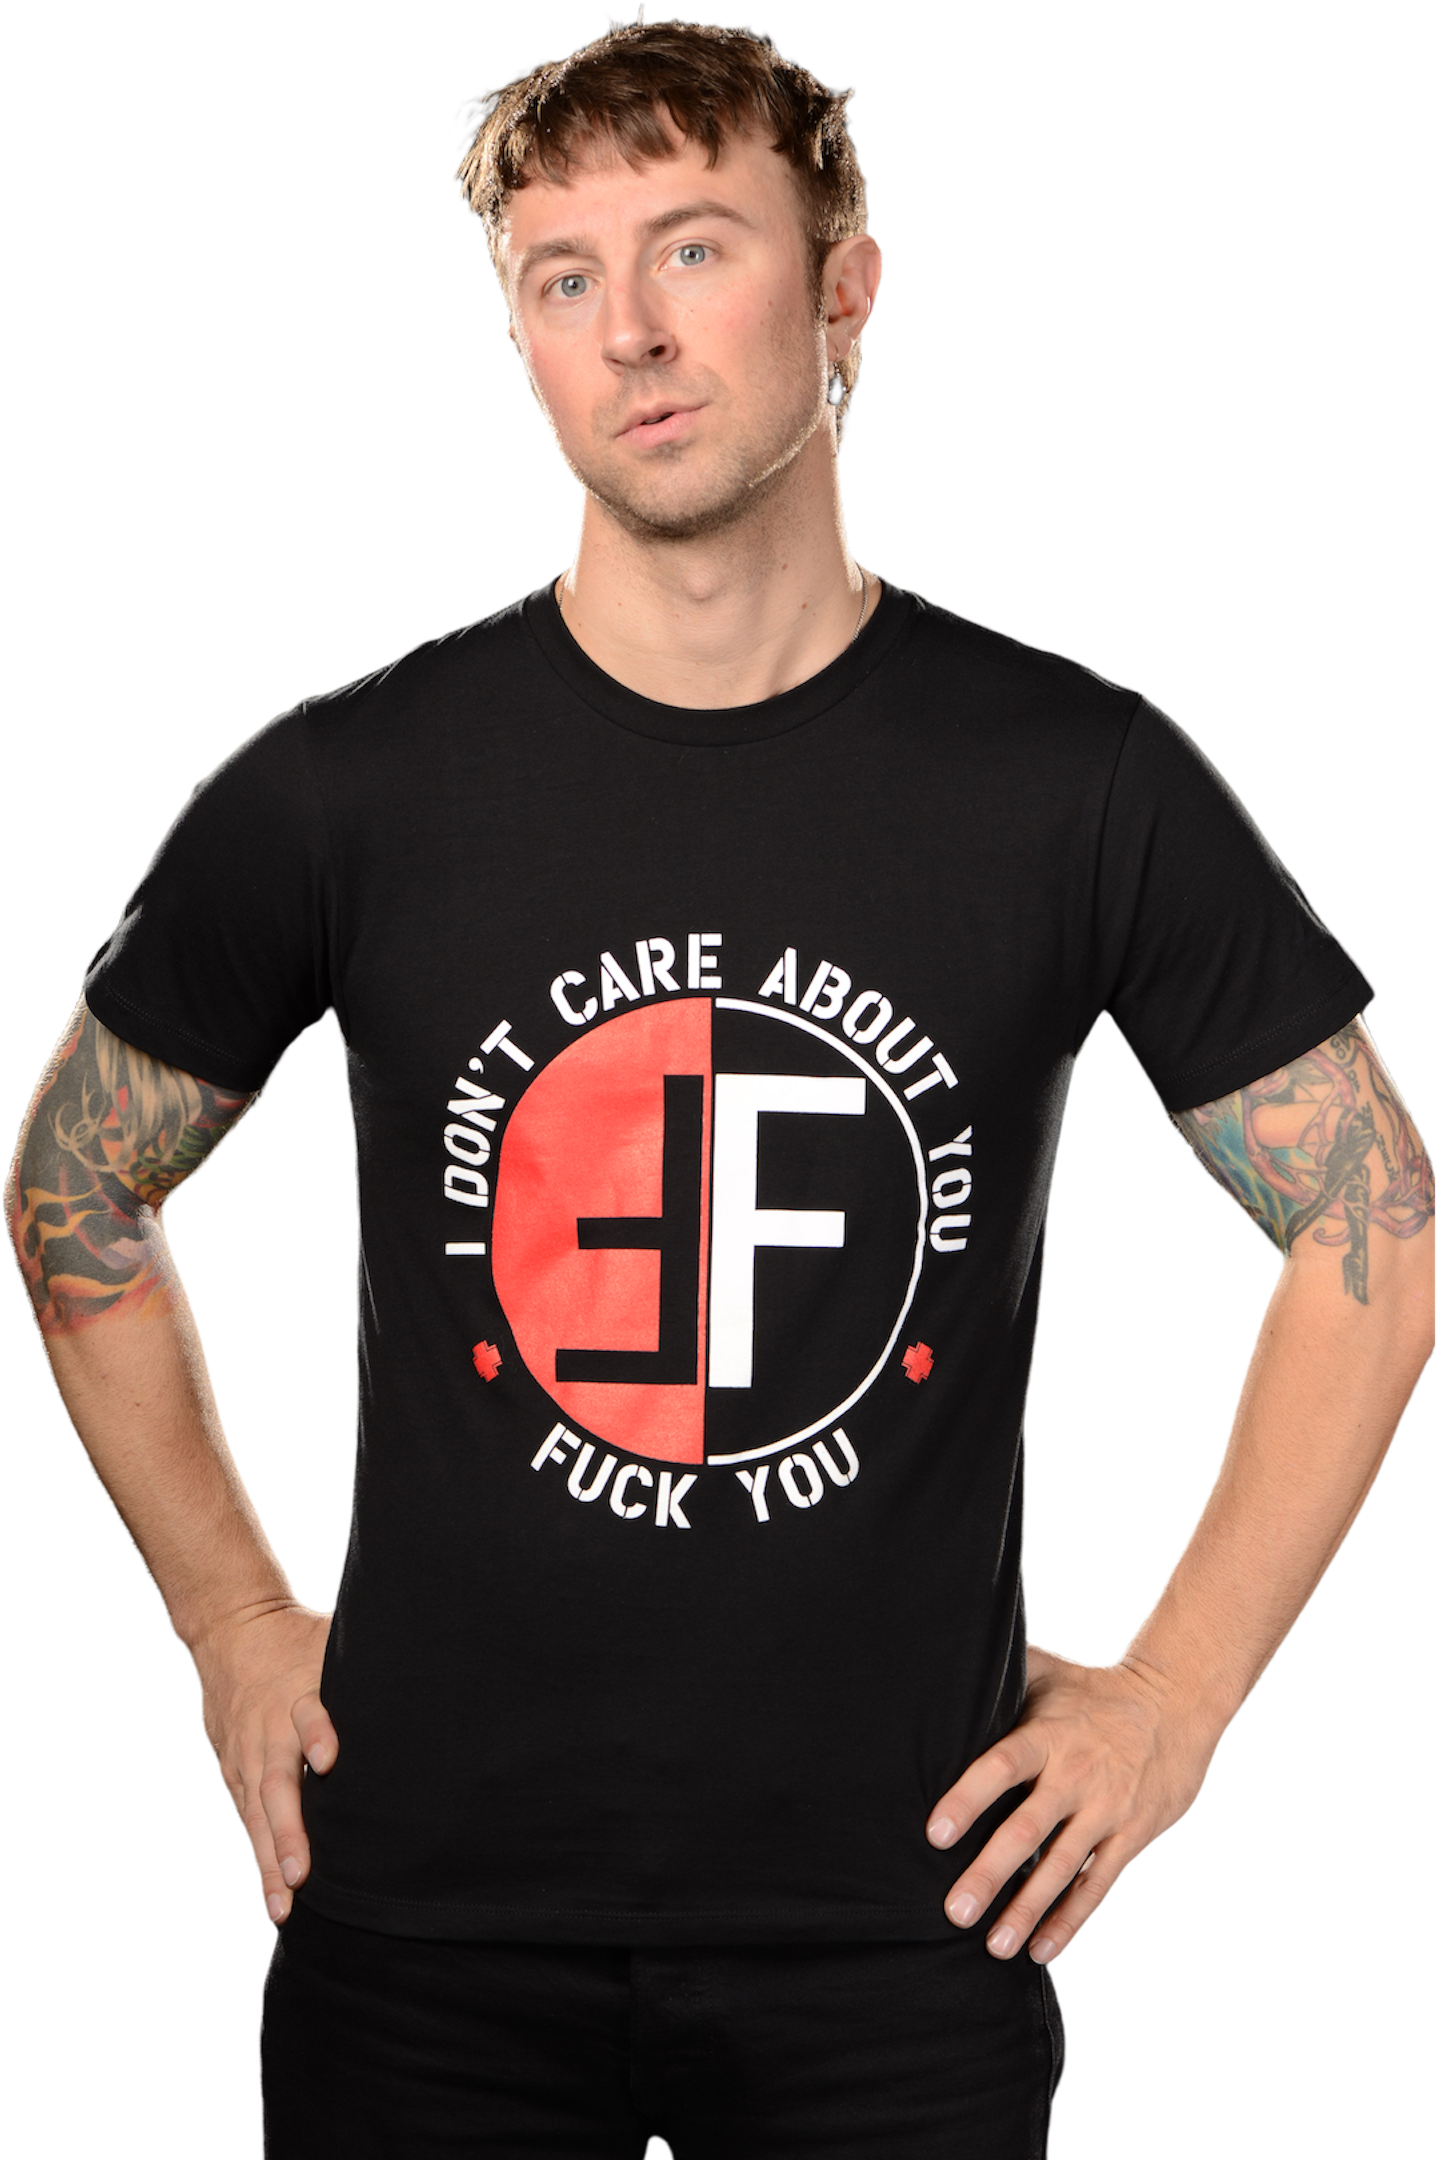 FEAR: "I DON'T CARE ABOUT T-SHIRT – Atom